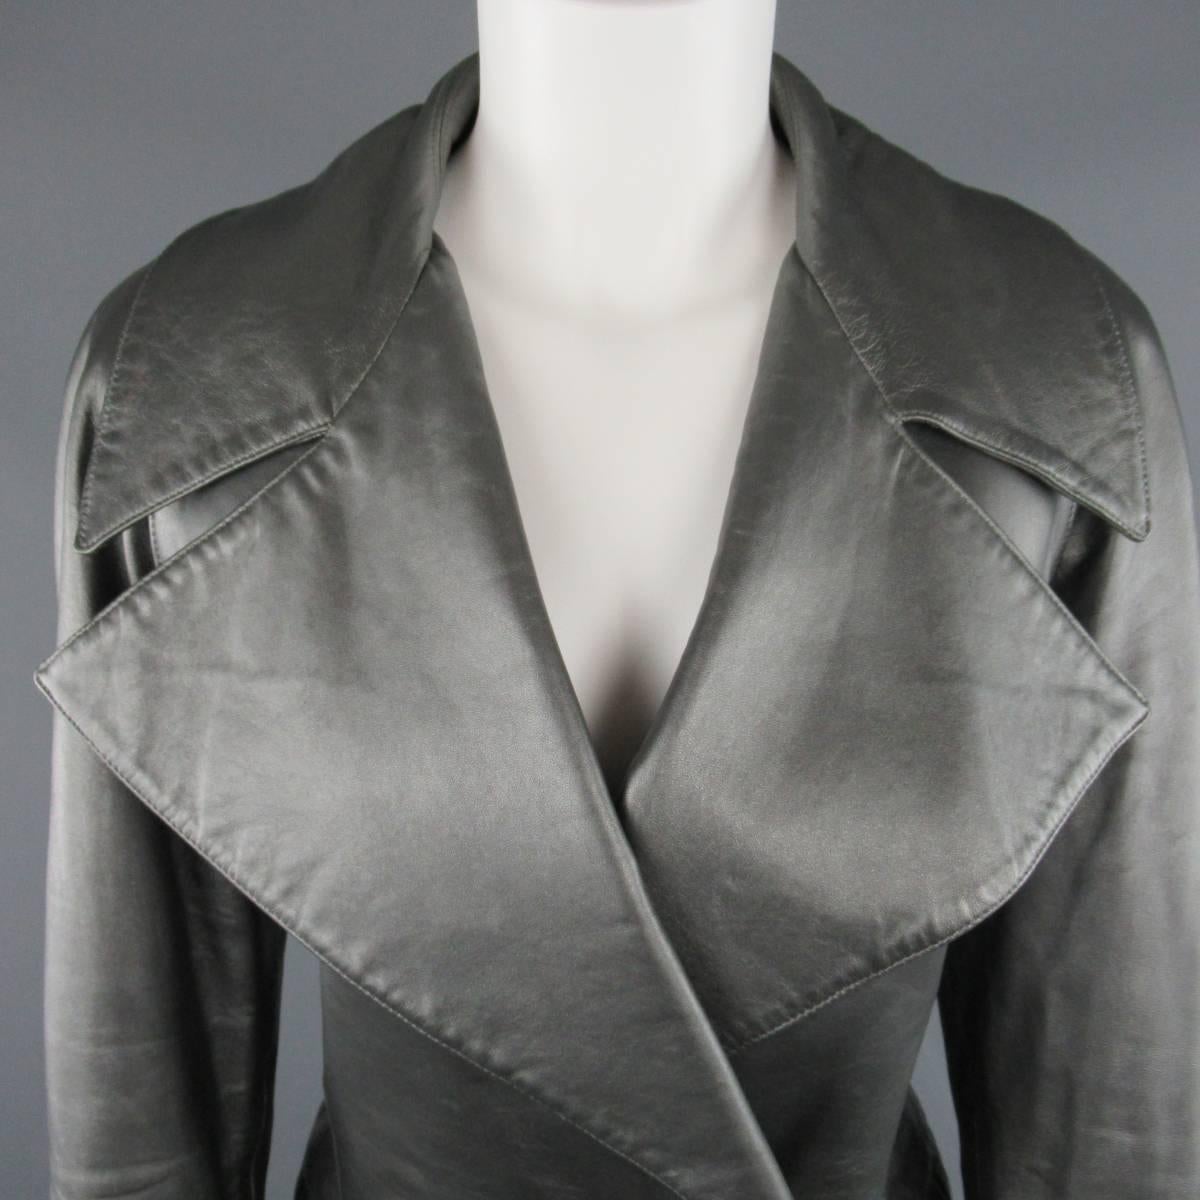 Vintage 1990's RALPH LAUREN COLLECTION jacket comes in a metallic smoke silver soft leather and features an oversized pointed collar lapel, double breasted button closure, flap pockets, and raglan sleeves. Minor wear throughout. Made in USA.

Fair